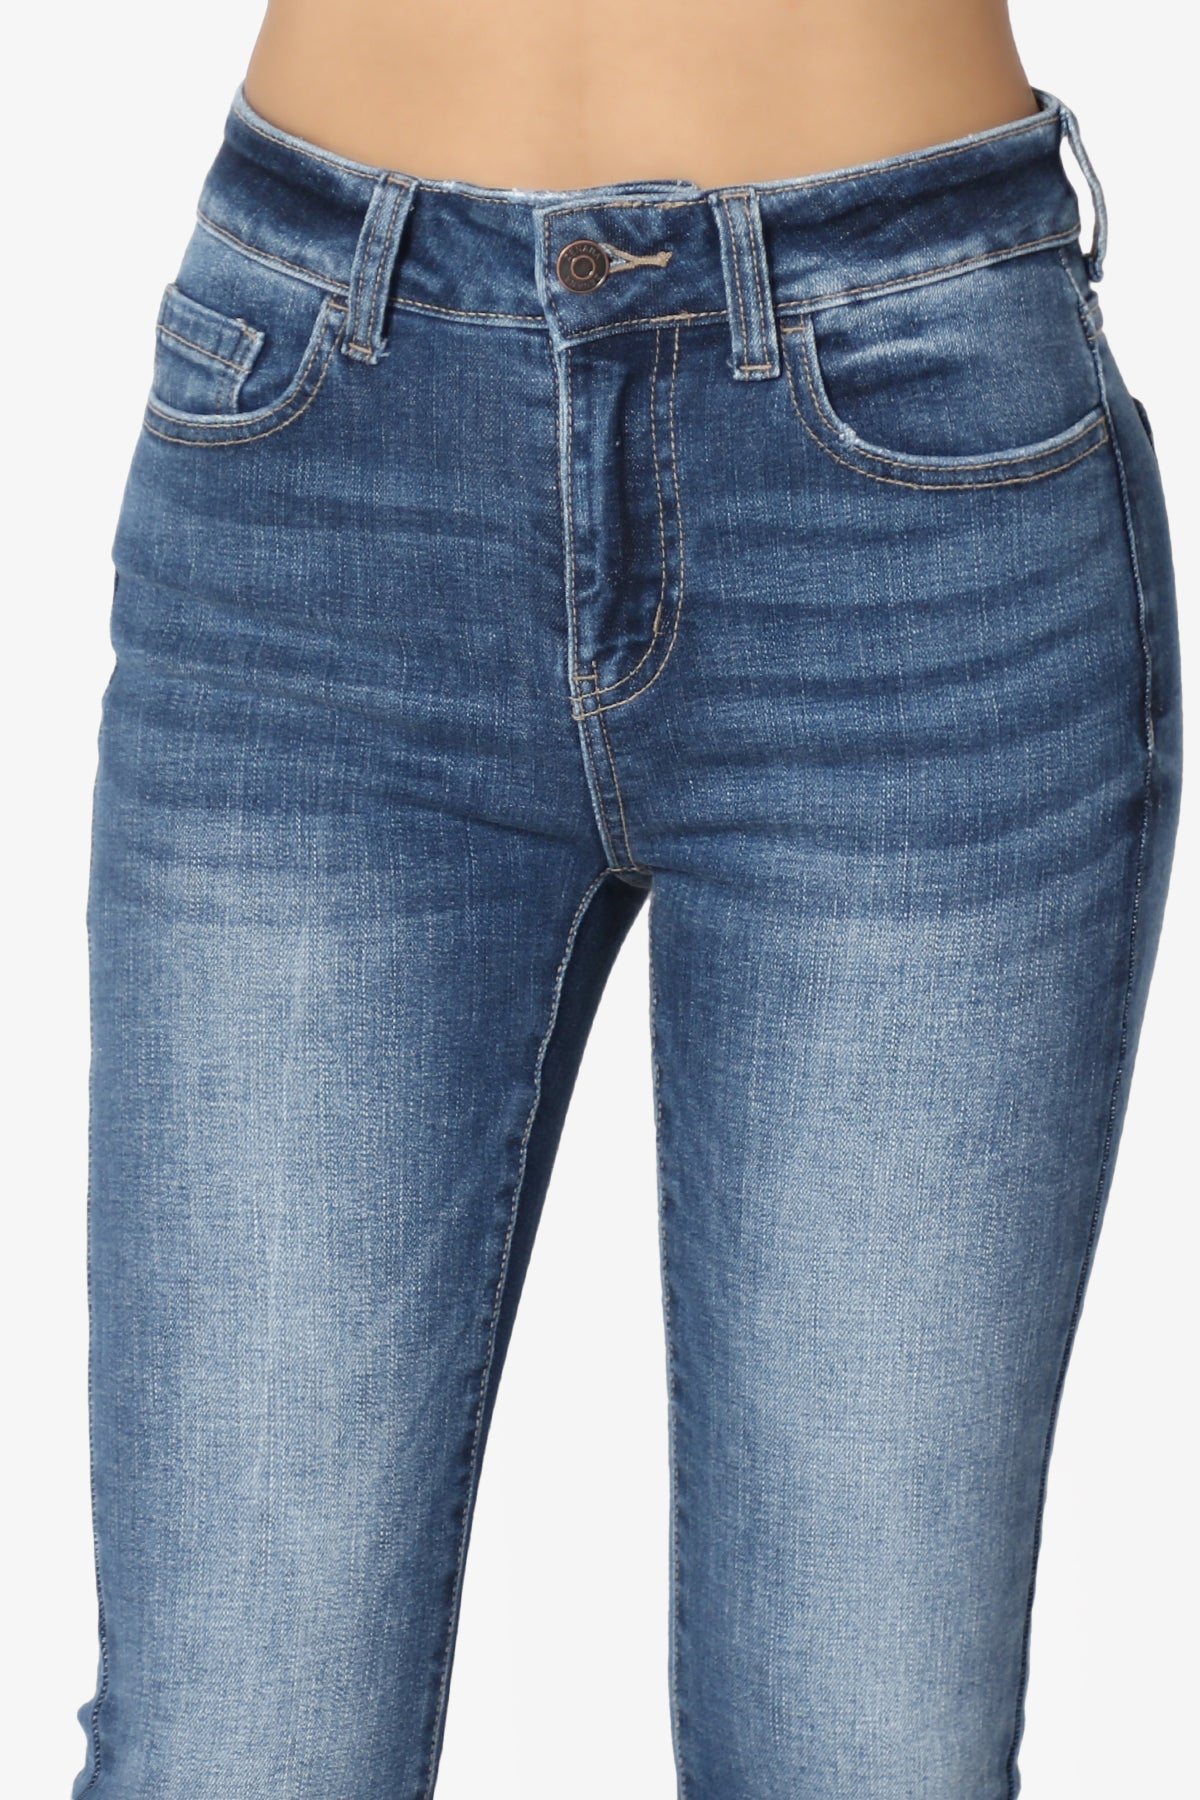 Pastry Washed High Rise Flared Jeans in Dark